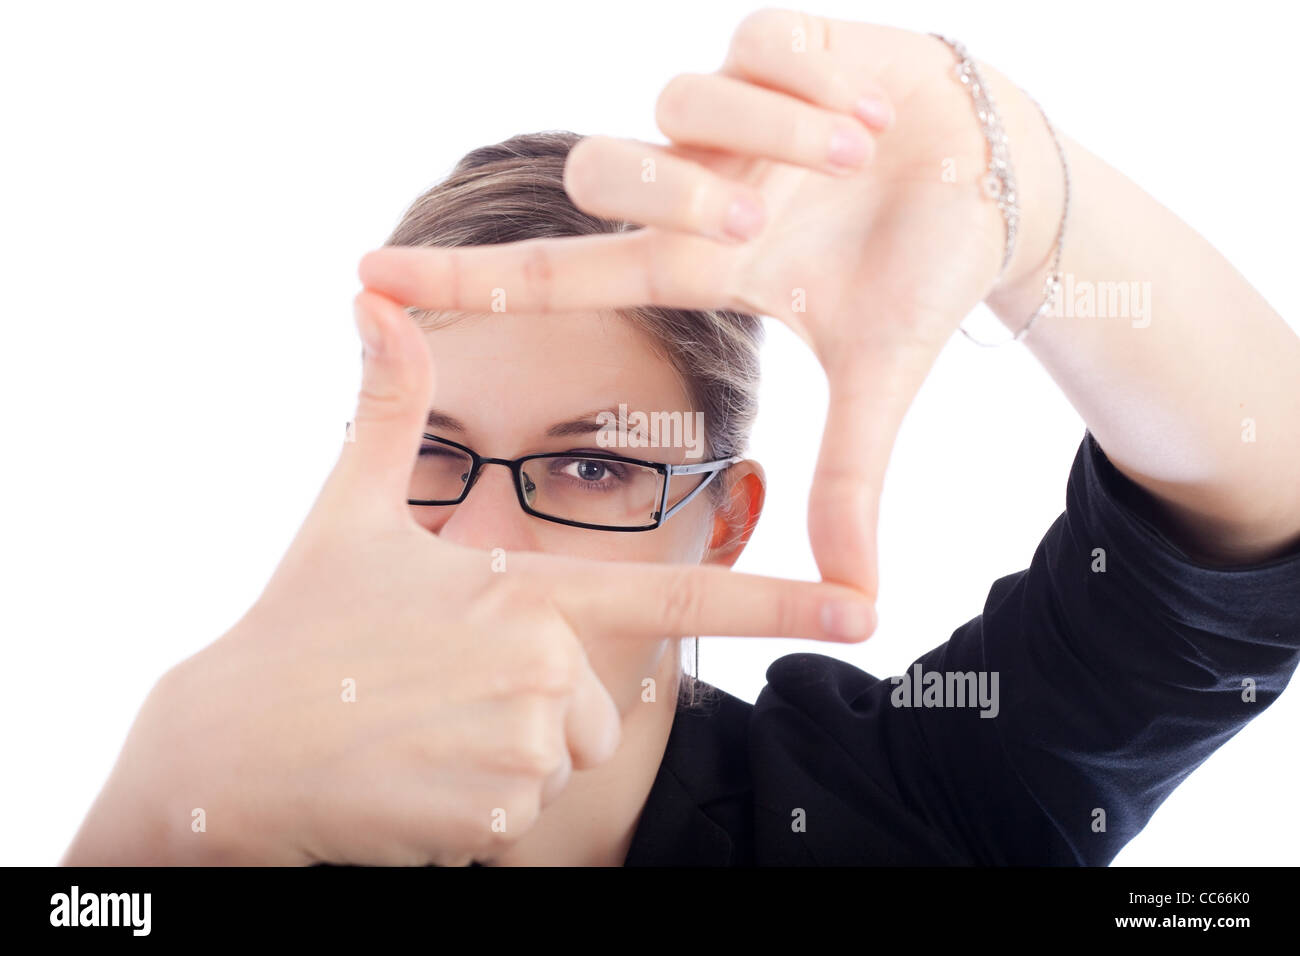 New business vision concept, businesswoman framing her face, isolated on white background. Stock Photo